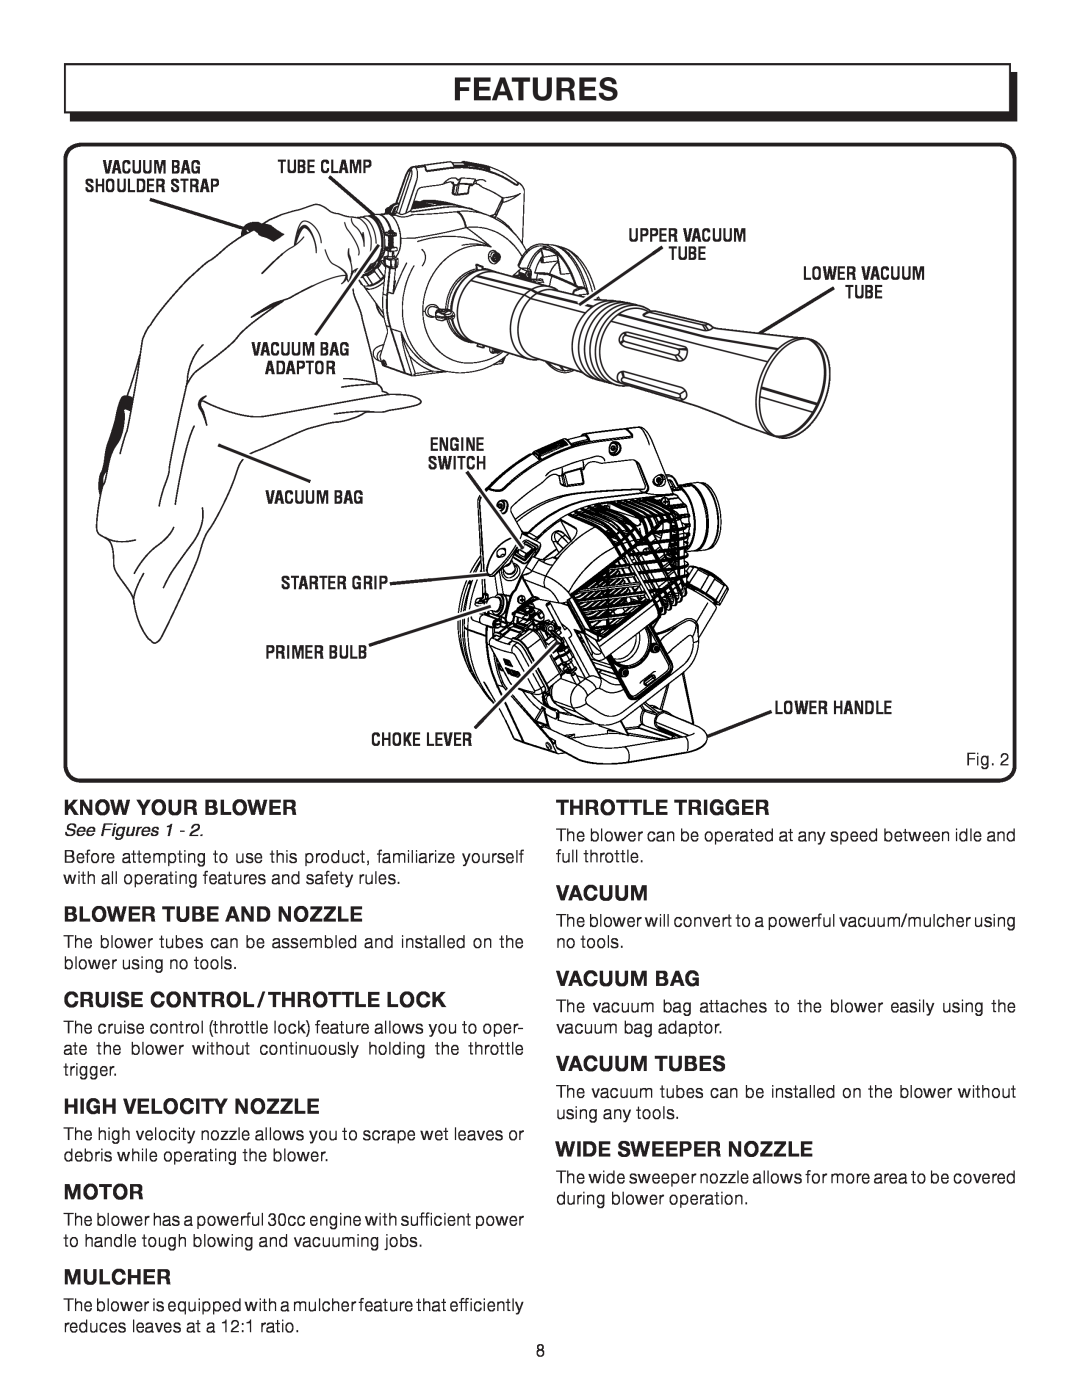 Homelite UT08542A manual Features, Know Your Blower 